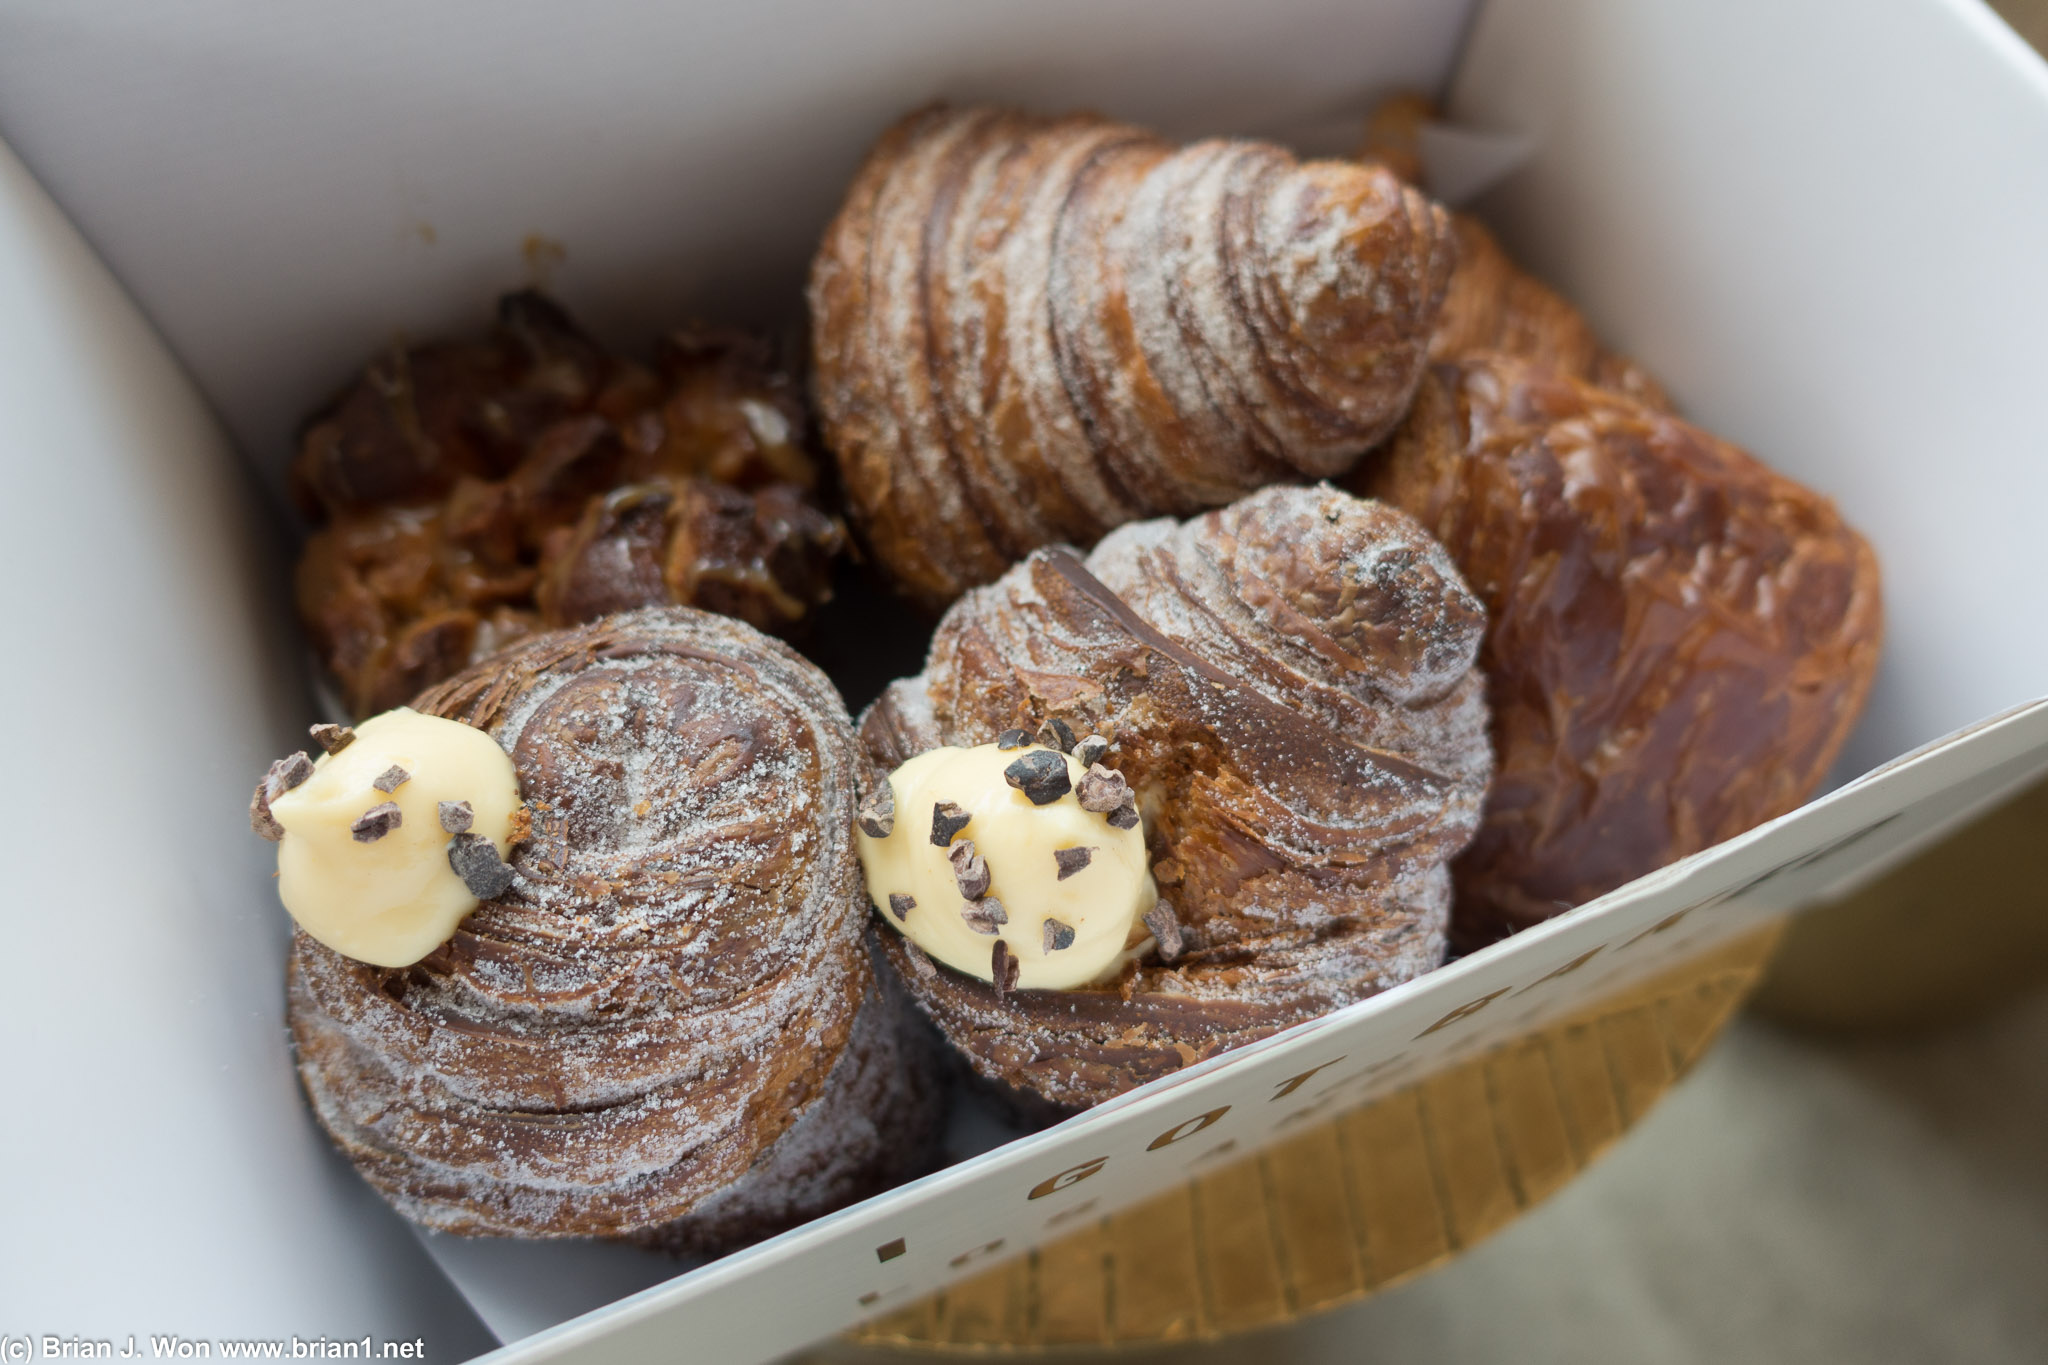 Mango-filled cruffins, front and center.